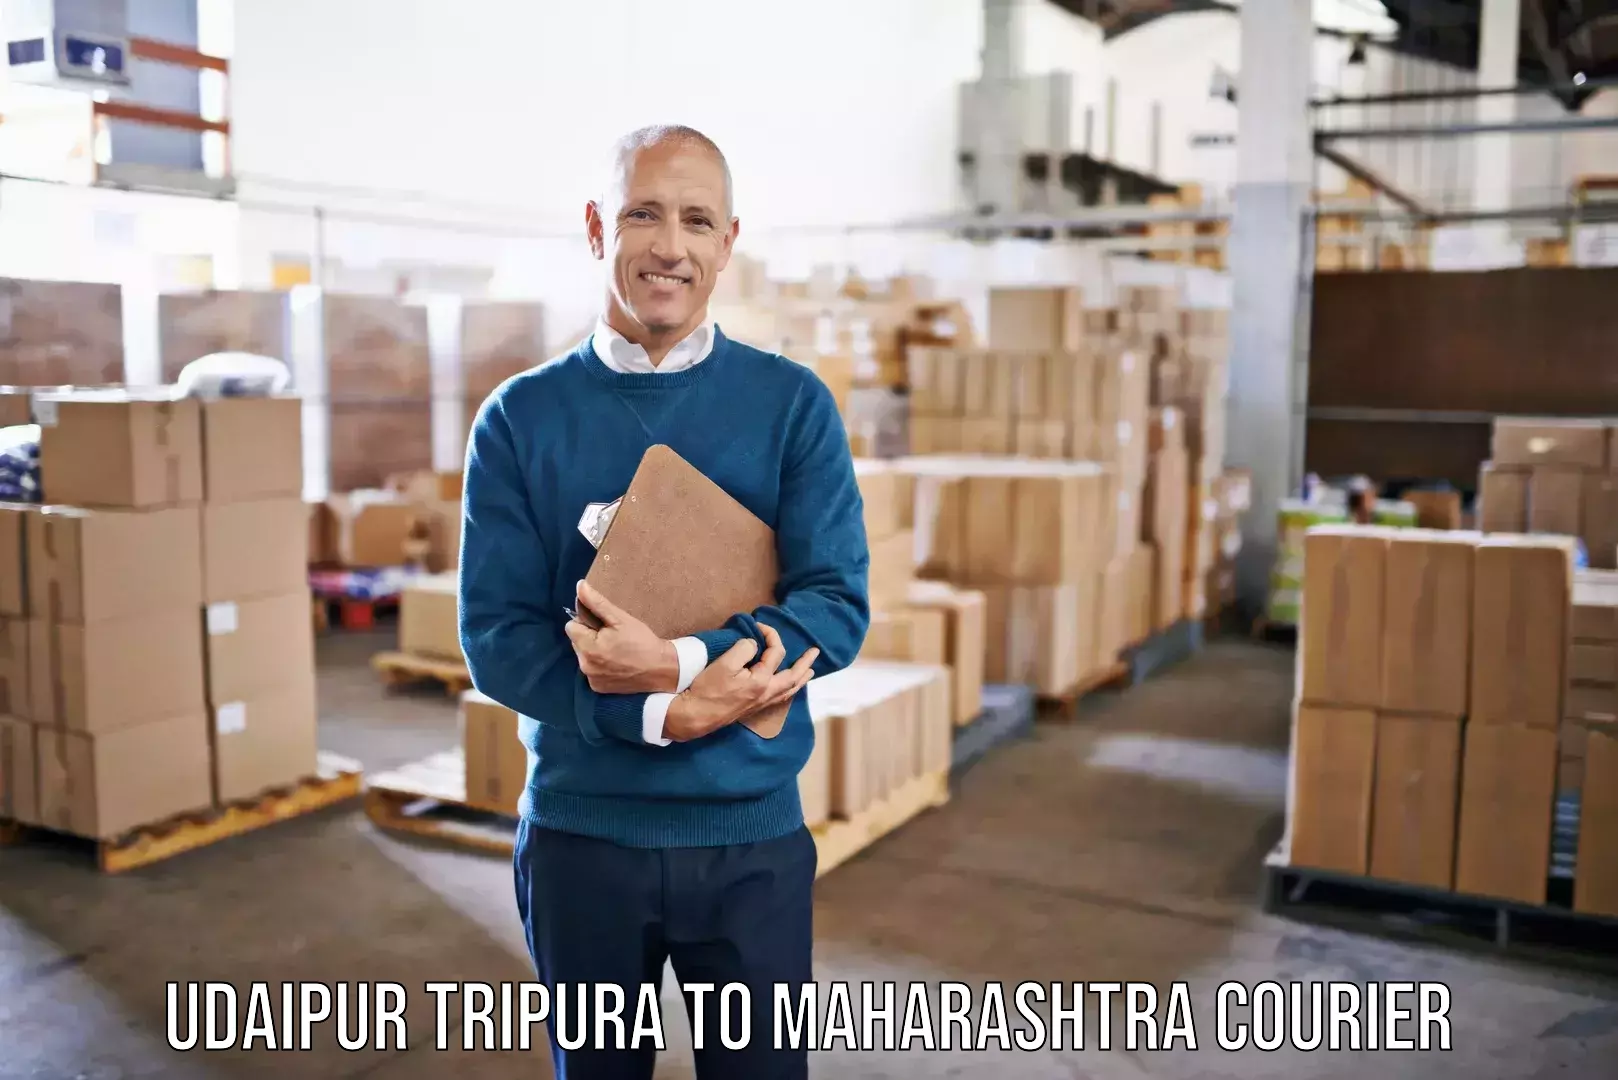 Furniture delivery service Udaipur Tripura to Washim